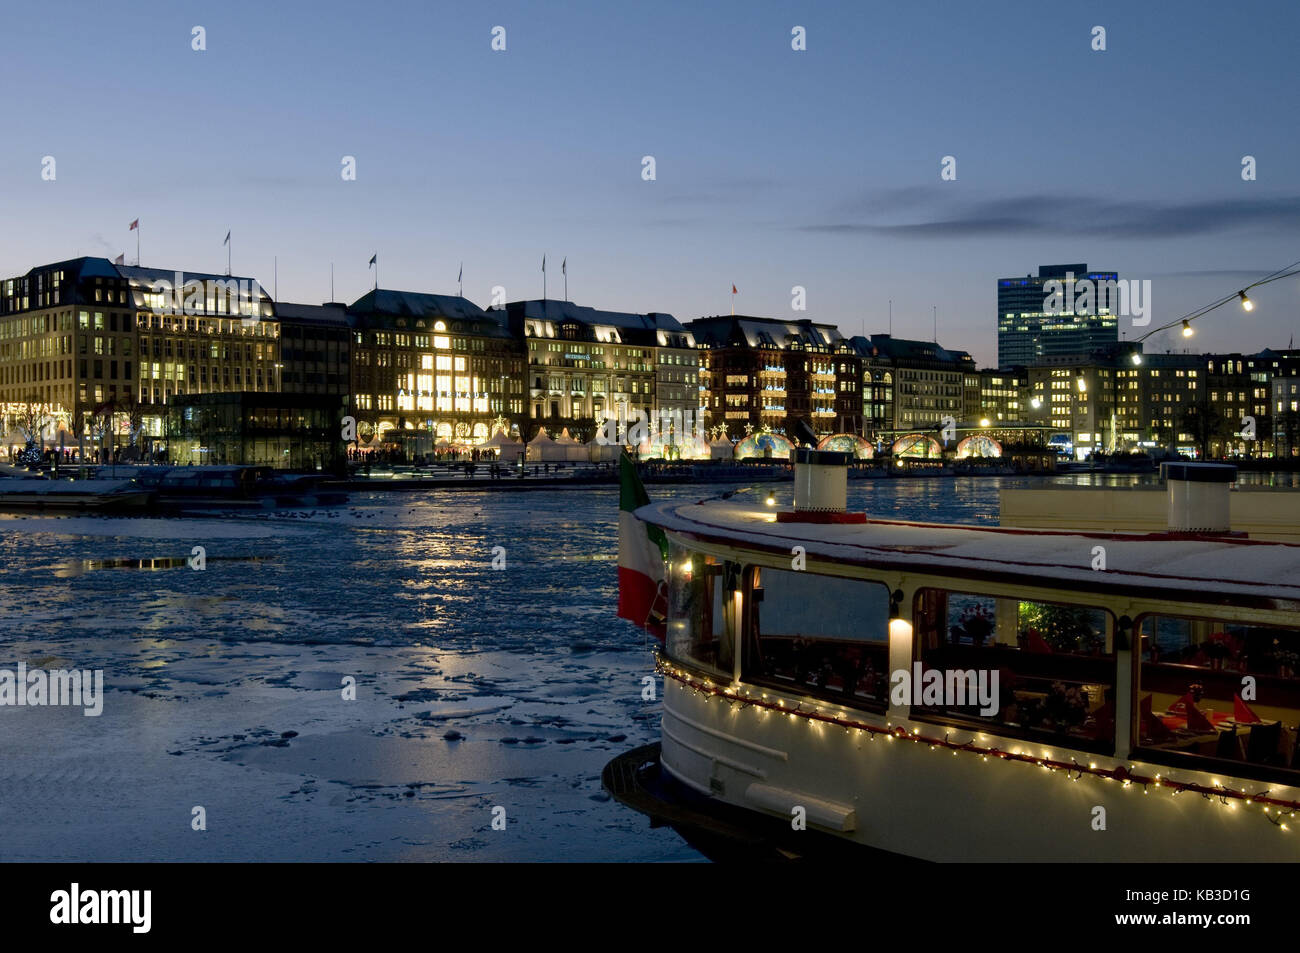 Germany, Hamburg, the Inner Alster by italieneischem restaurant ship Galathea, Christmas decoration, in the evening, town, water, waters, tourism, ship, restaurant, journeyling, city trip, Christmas, light jewellery, holidays, winters, Jungfernstieg, the Inner Alster, restaurant ship, Galathea, food, festival, gastronomy, townscape, evening, dusk, yule tide, Stock Photo